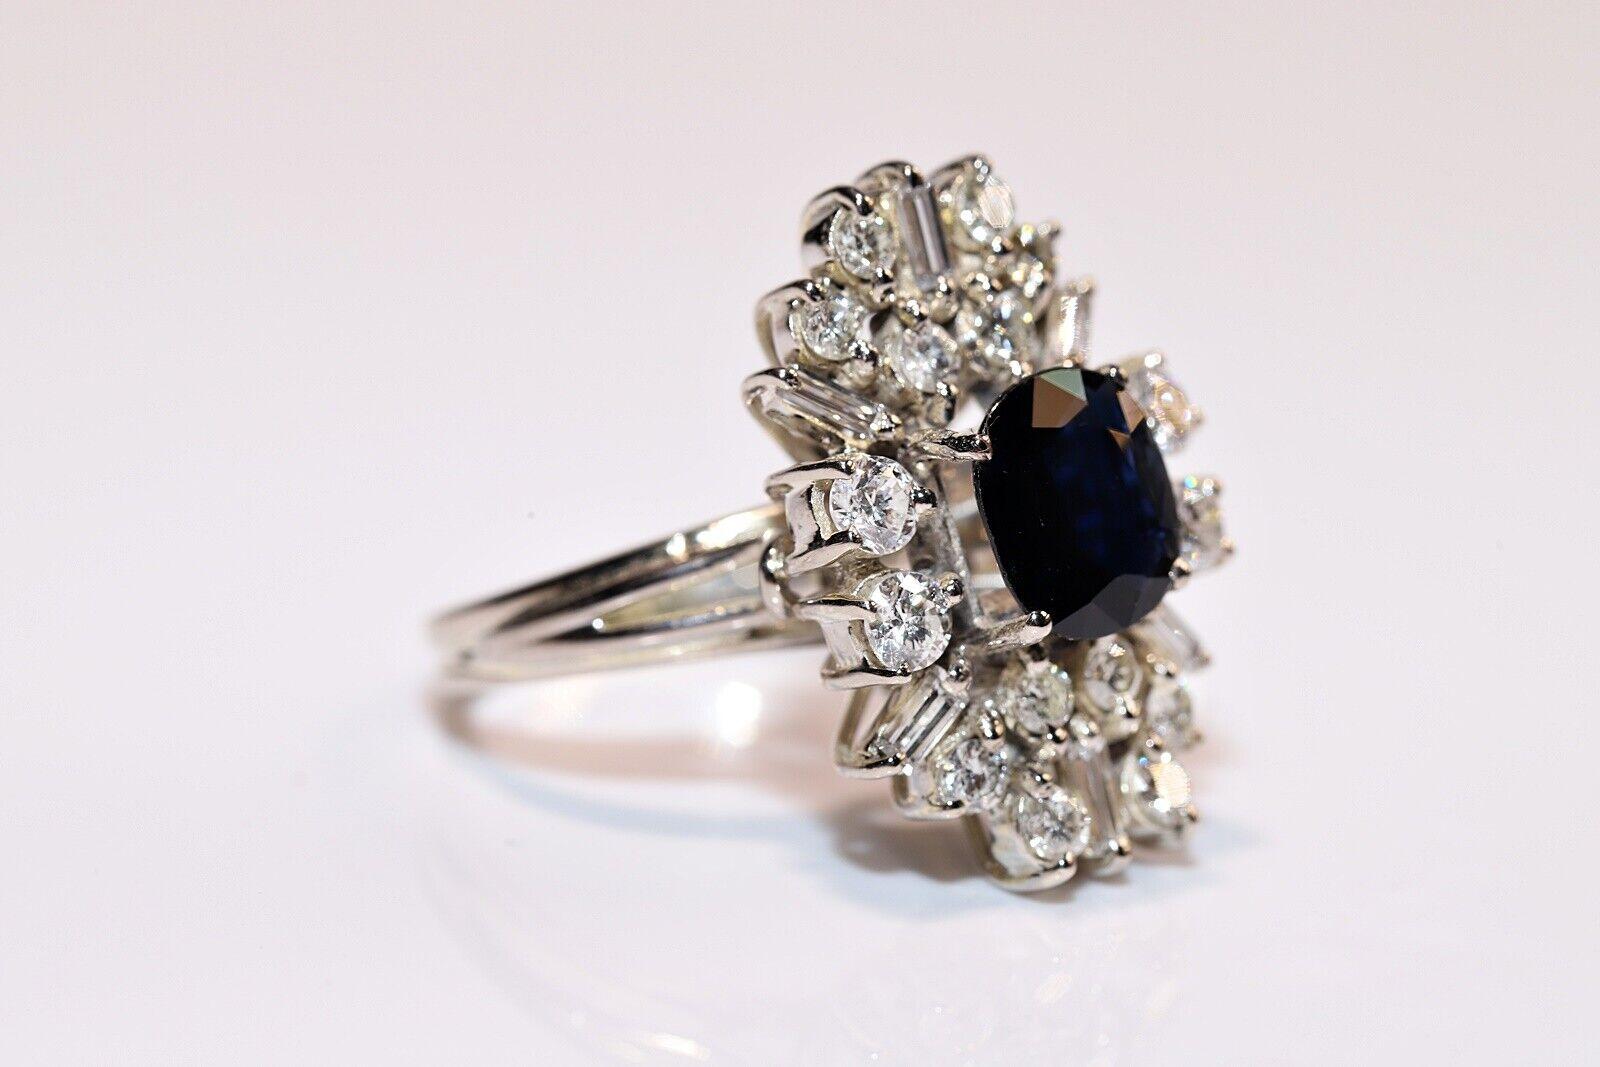 In very good condition.
Total weight is 7.8 grams.
Total about is 1.10 ct Diamond.
Total about is  2.50 ct Sapphire.
The diamond is  has vs-s1 clarity and G-H color.
Ring size is US 8.75  (We offer free resizing)
The ringht is height 2.7 cm
We can